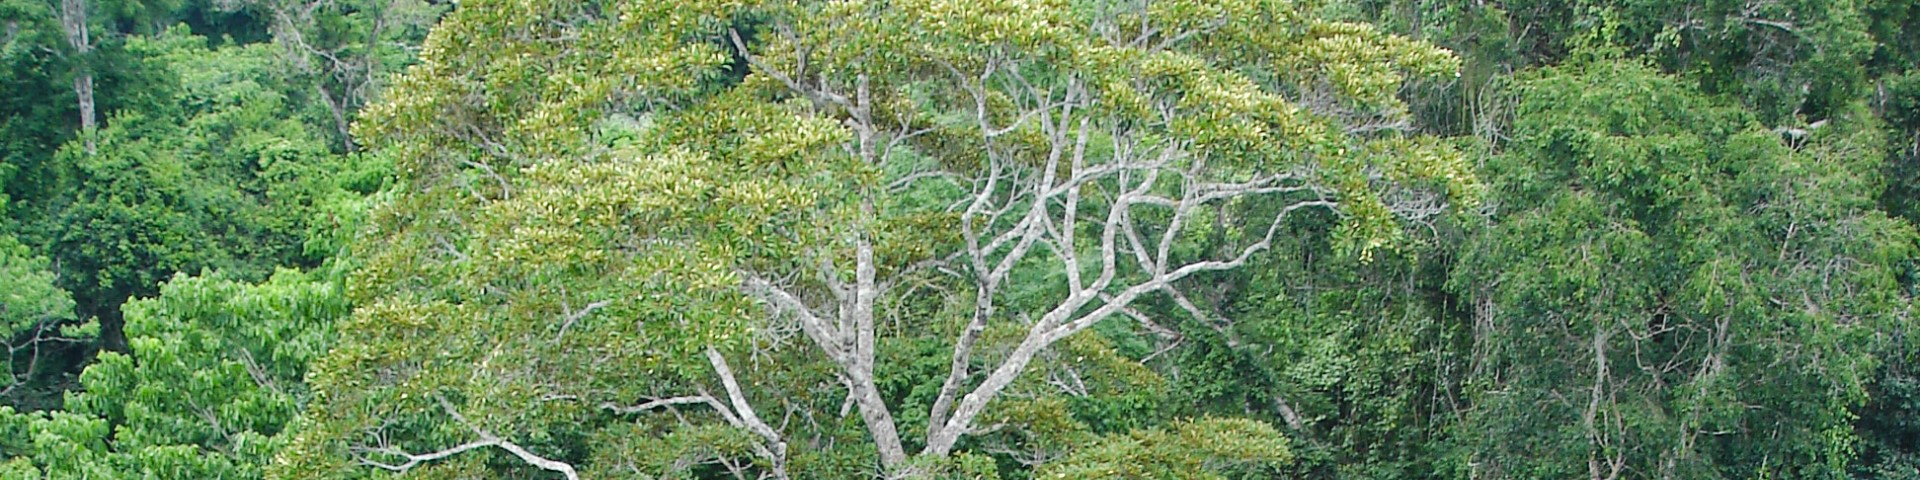 Vegetation in the Amazon forest